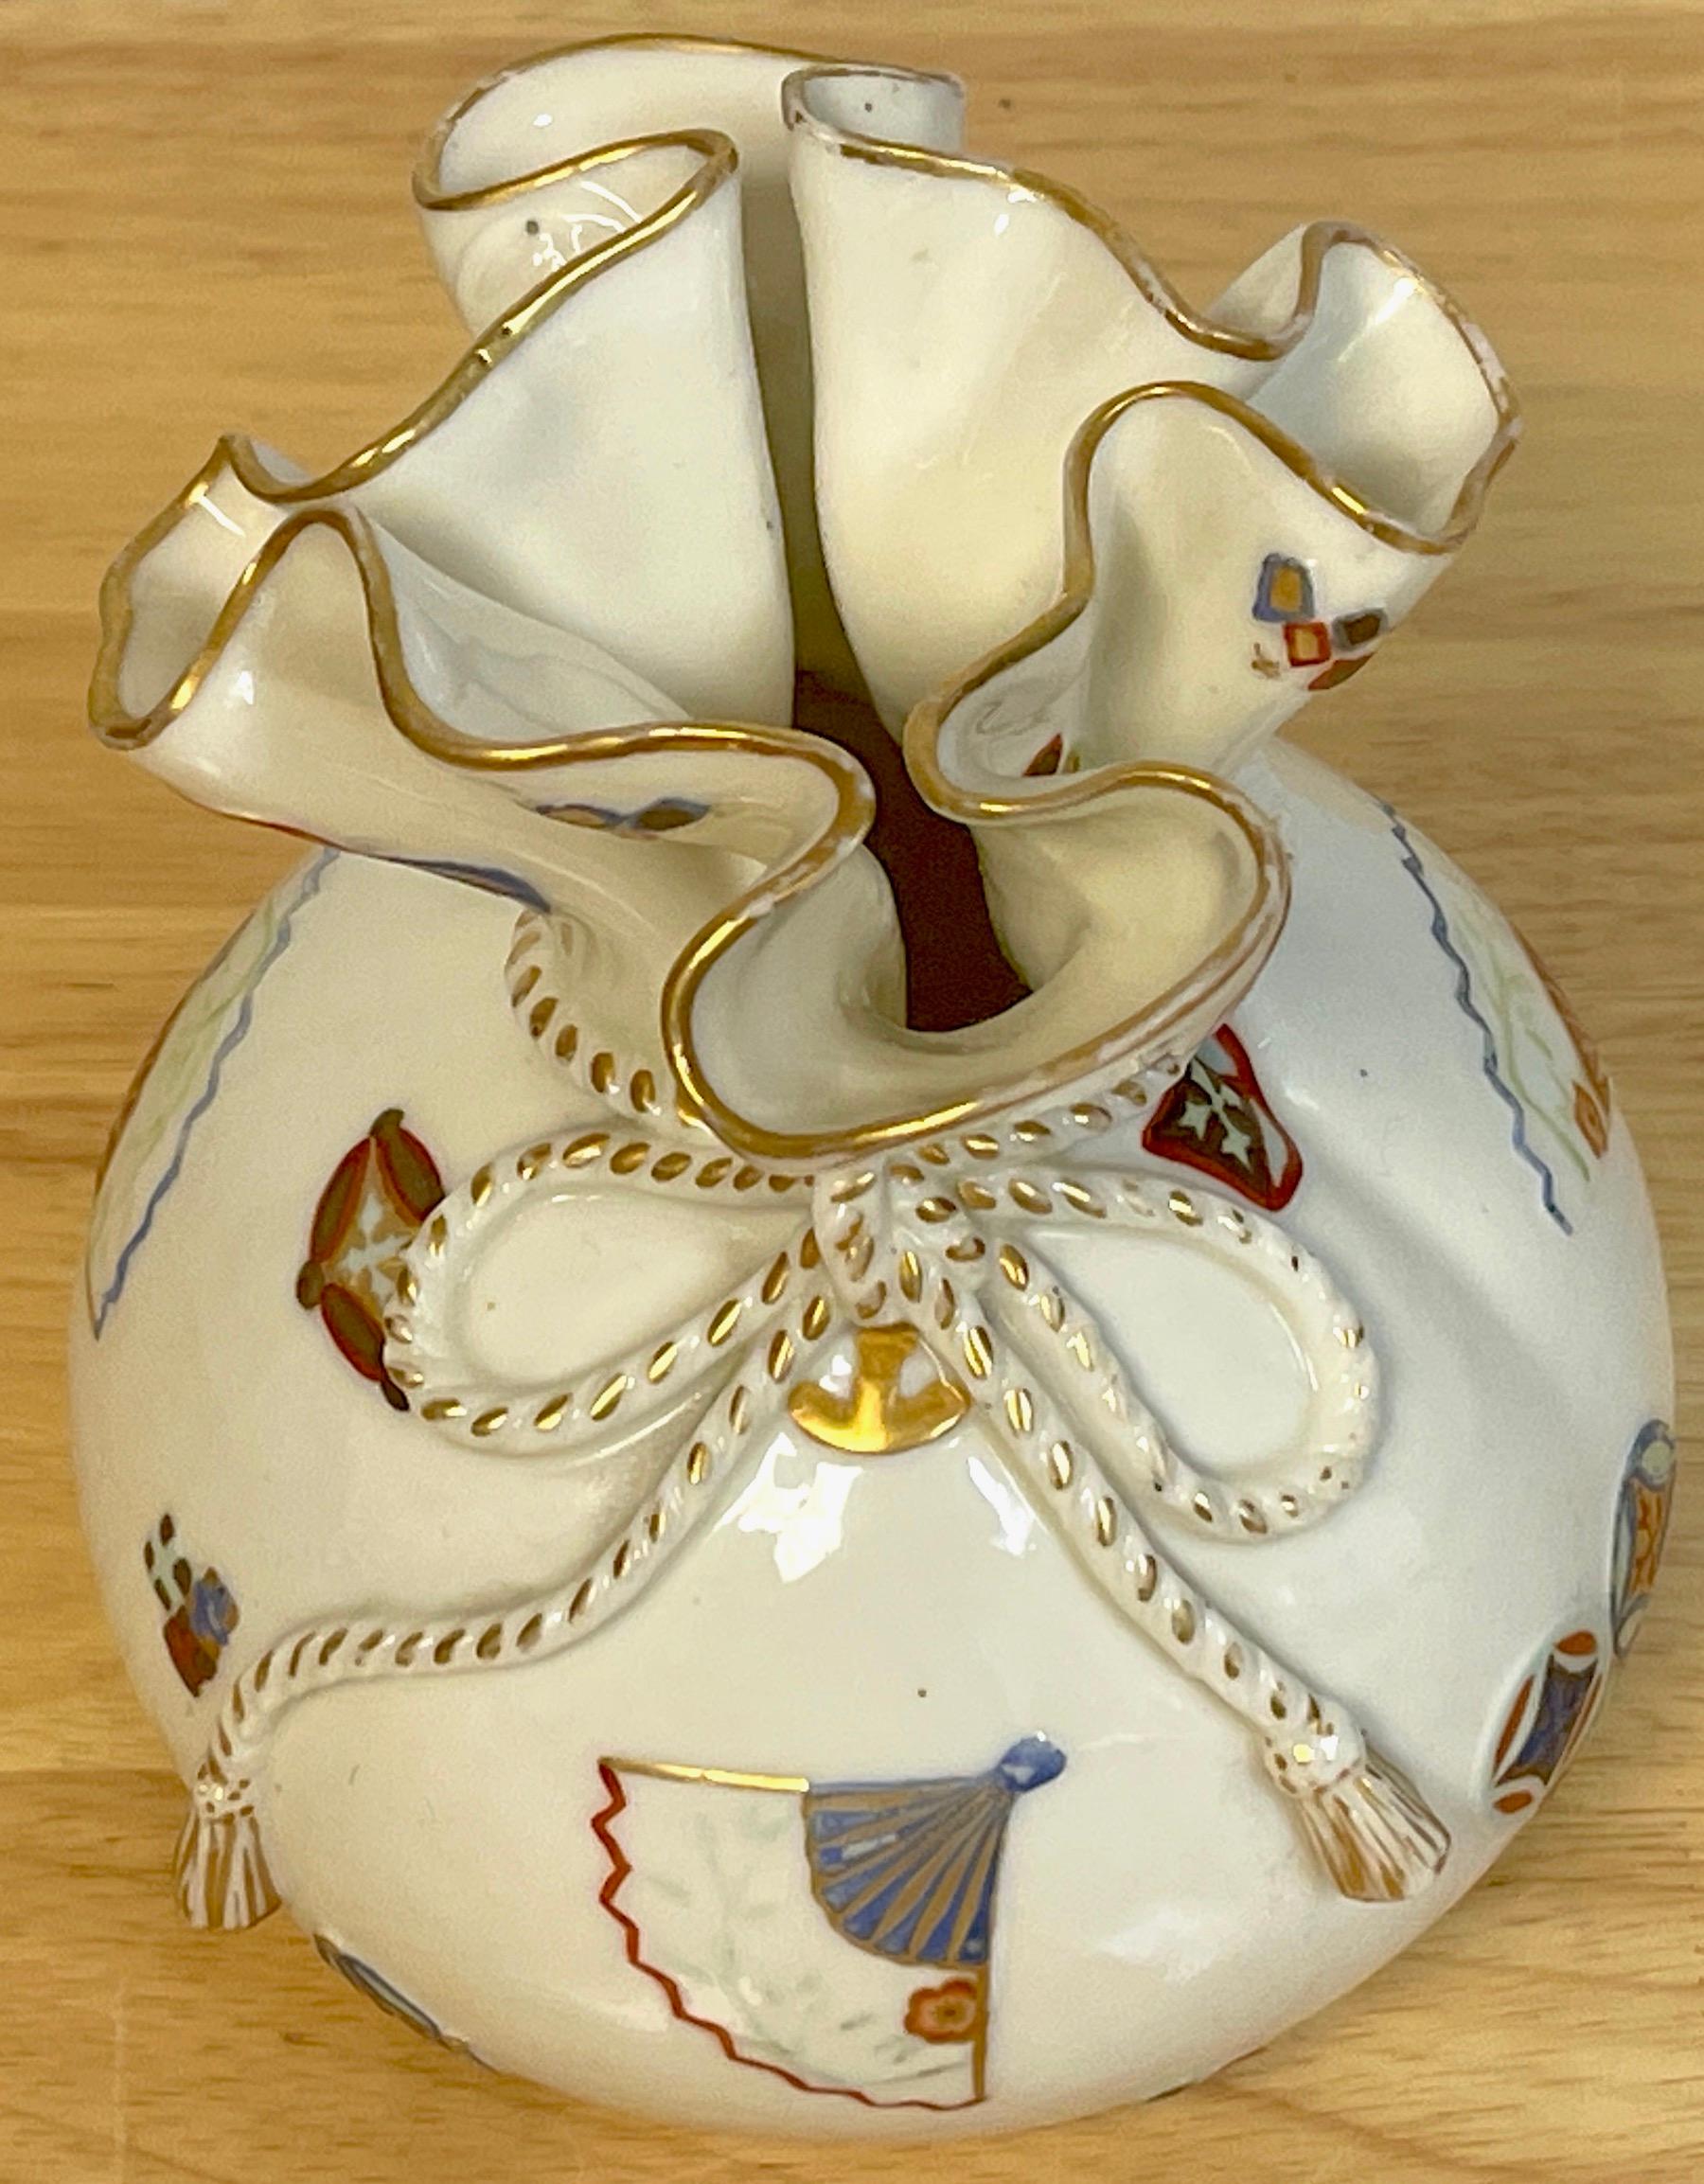 Royal Worcester Aesthetic / Japonisme handkerchief vase, 1876
A fine example of the English Aesthetic Movement, realistically modeled of sparsely decorated and molded with precious objects and symbols. Ruffled 4-Inch diameter top with intertwined